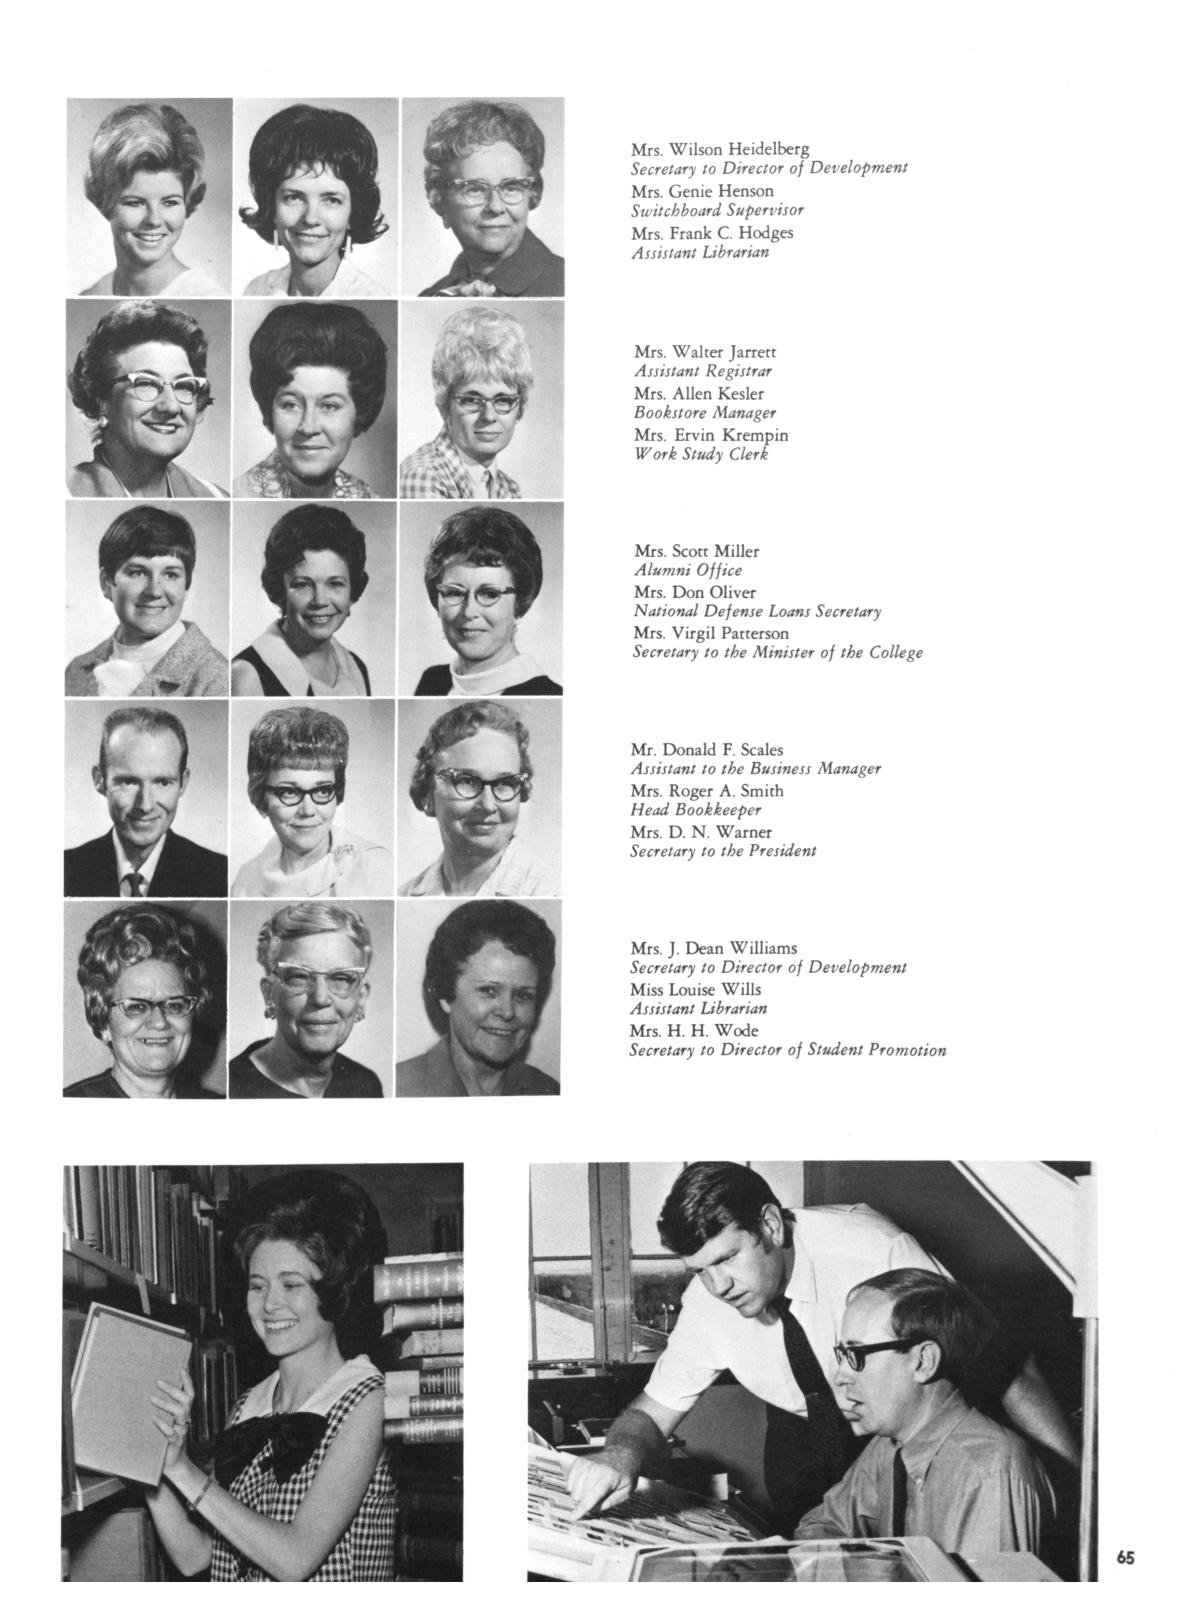 The Totem, Yearbook of McMurry College, 1970
                                                
                                                    65
                                                